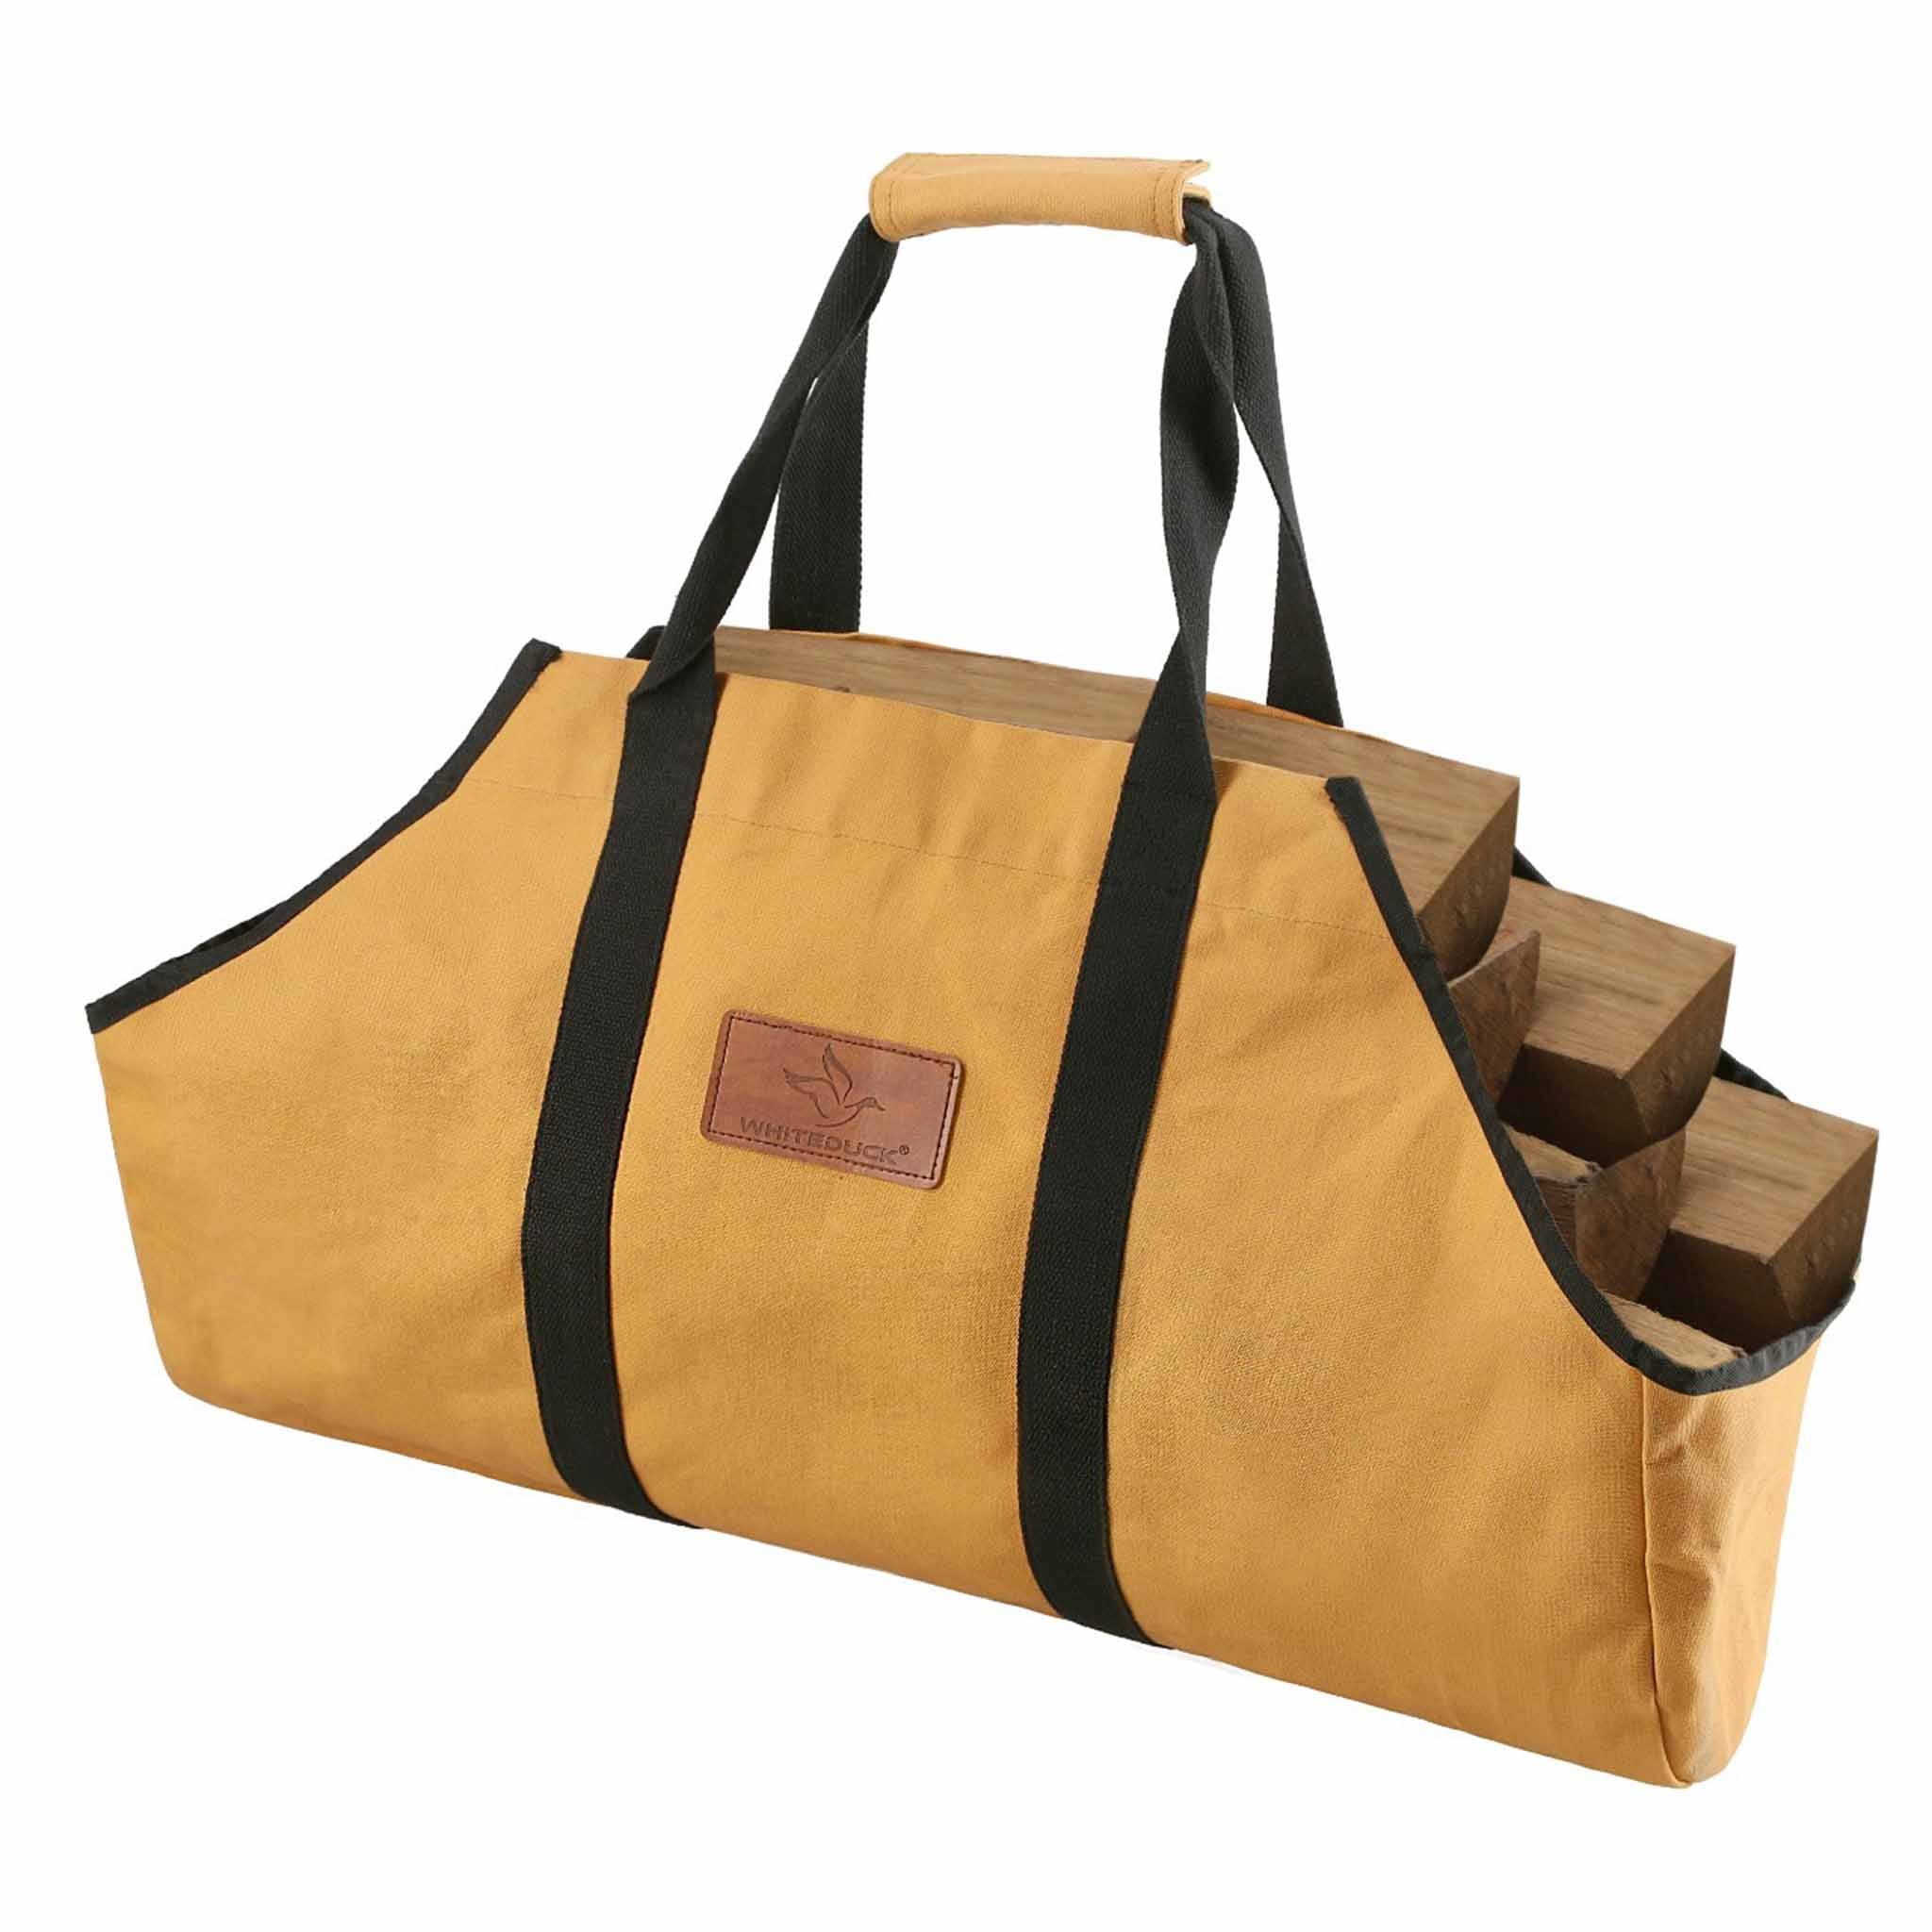 Buy khaki Firewood Carrier Log Carrier Wood Carrying Tool Bag for Fireplace  Waxed Canvas by Just Green Tech on Dot & Bo